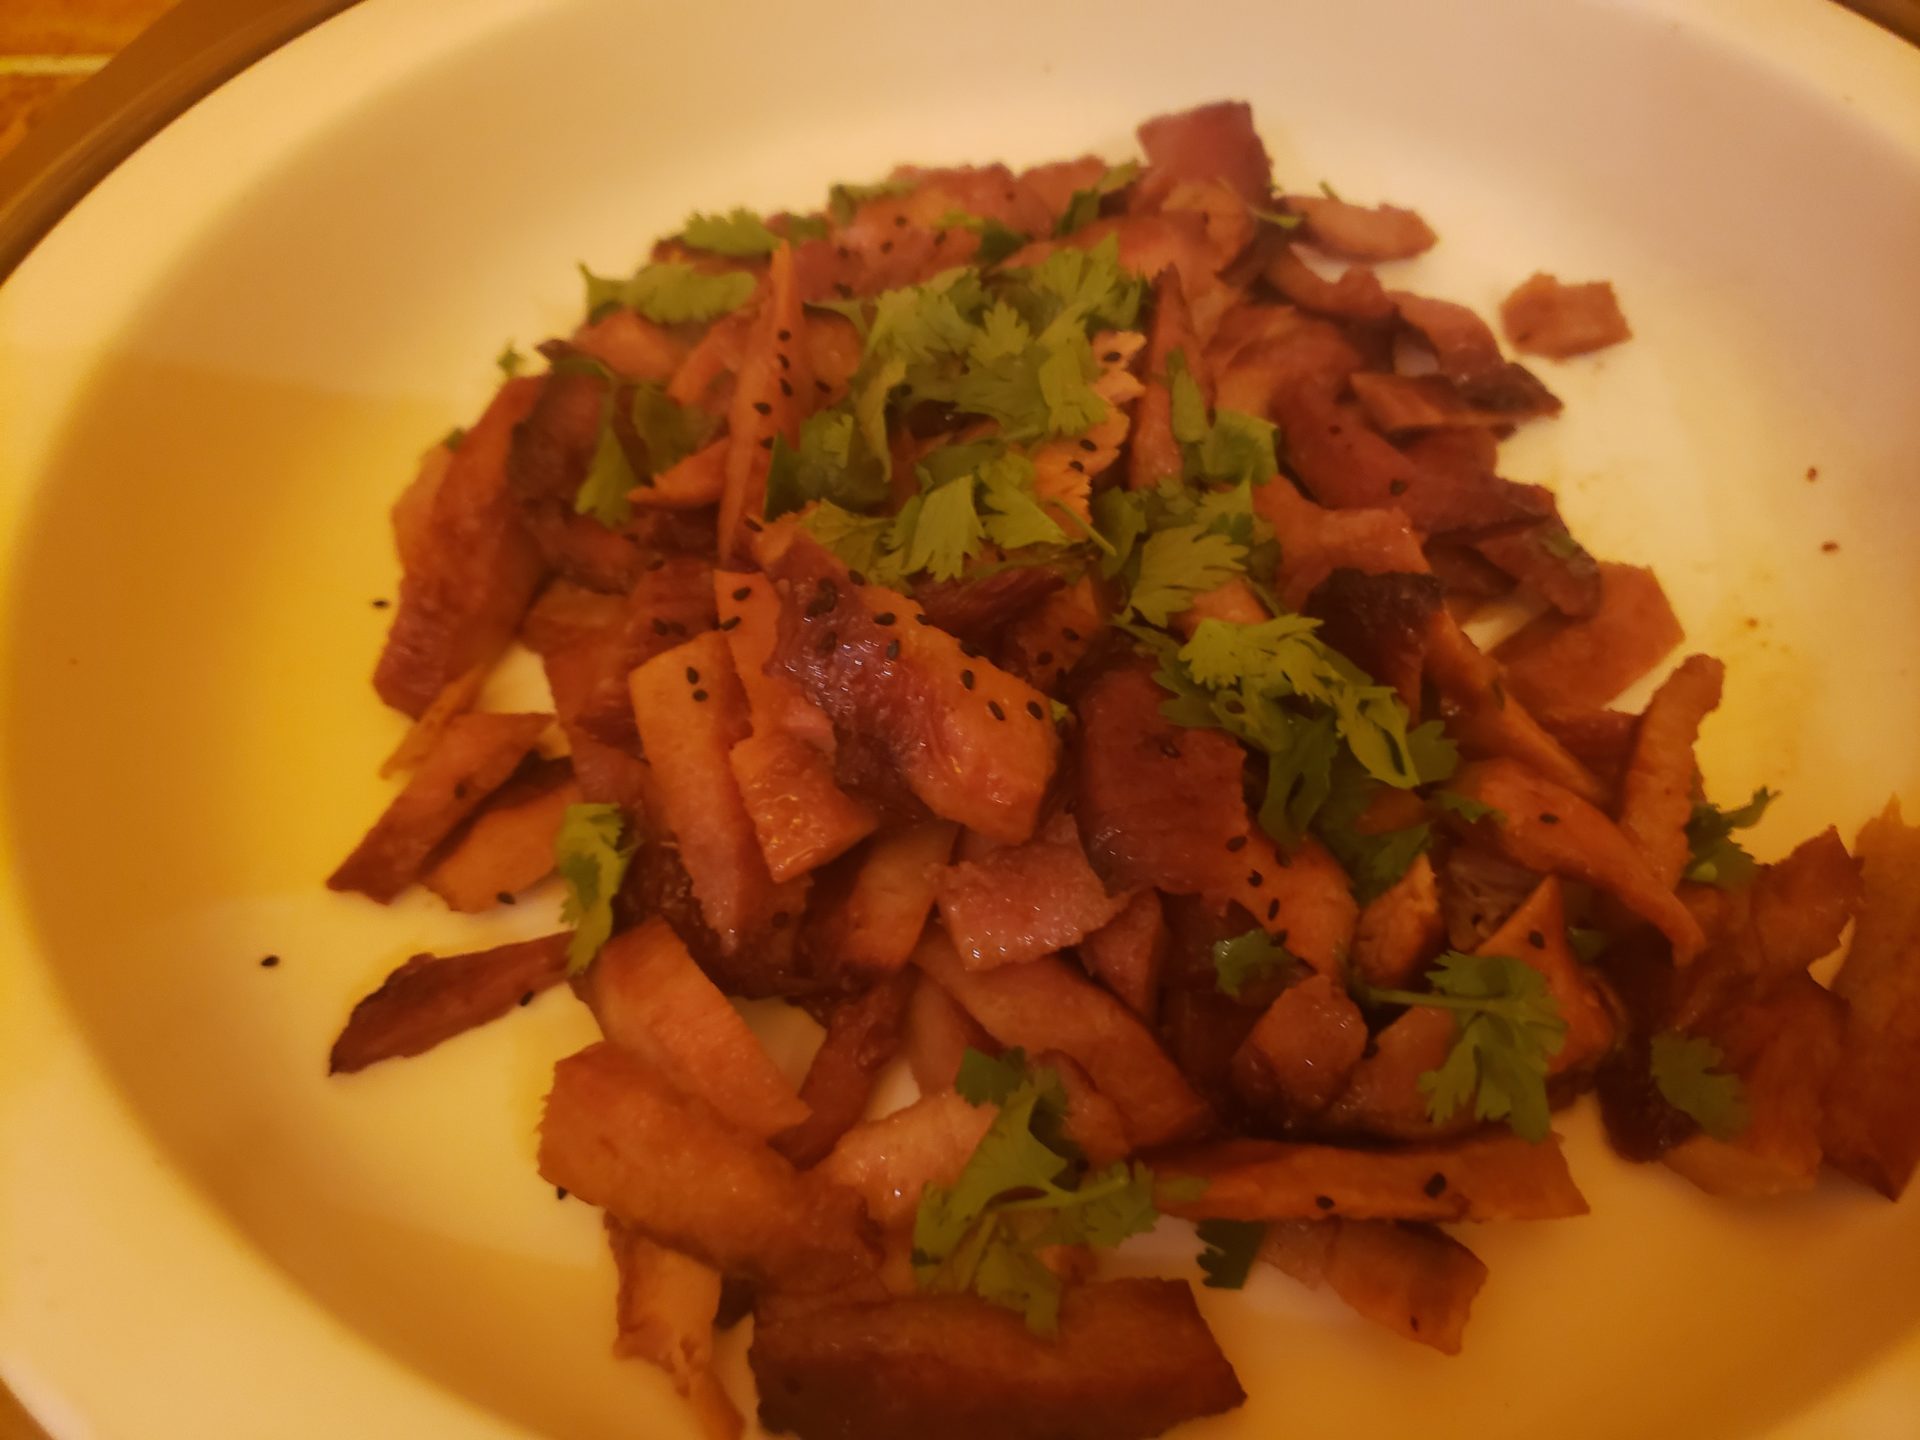 a plate of food with meat and cilantro